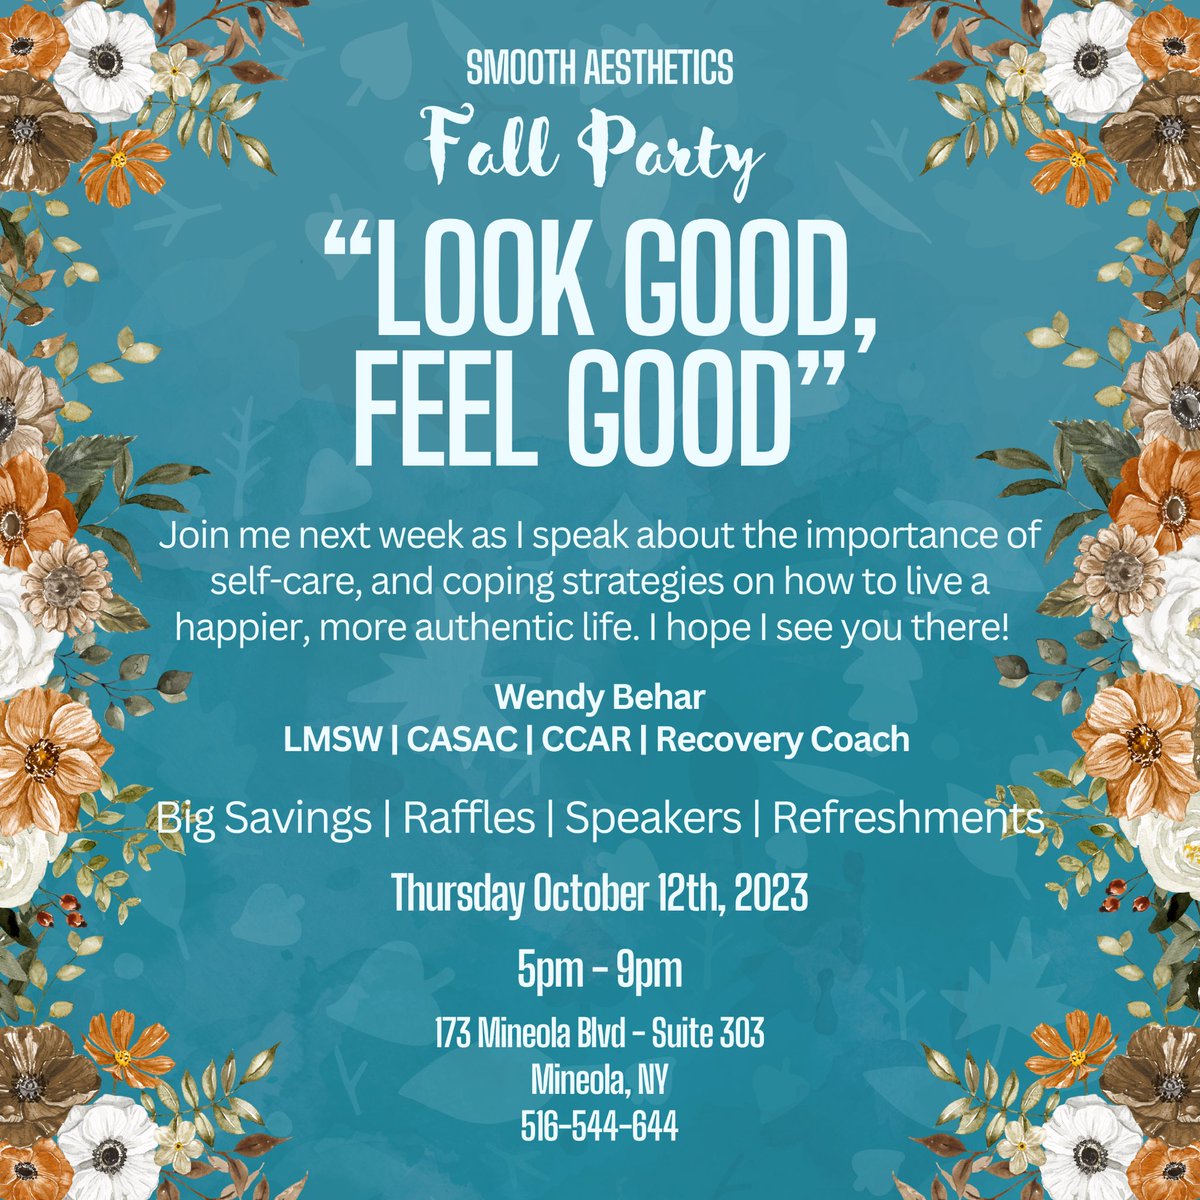 Join me next week on Thursday October 12th at 5pm at @smoothaestheticsmd Fall Party! 

#booksigning #seasonalparty #smoothaestheticsmd #mineola #longislandevents #mineolany #mineolaevents #skincare #womeninrecovery #addictionspecialist #soberwomen #sobriety #sobertherapist